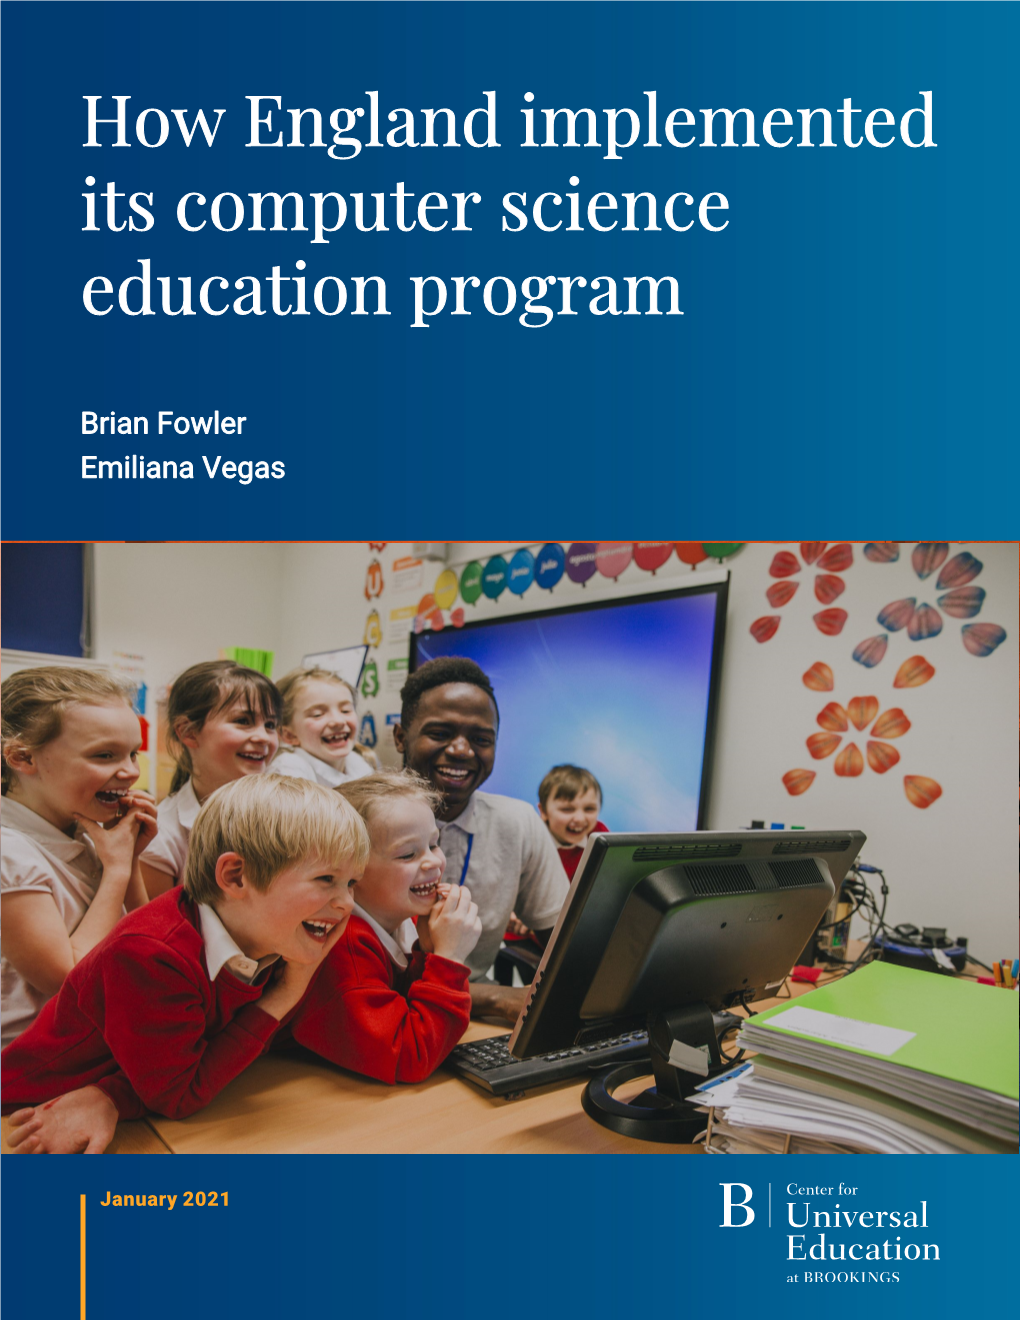 How England Implemented Its Computer Science Education Program